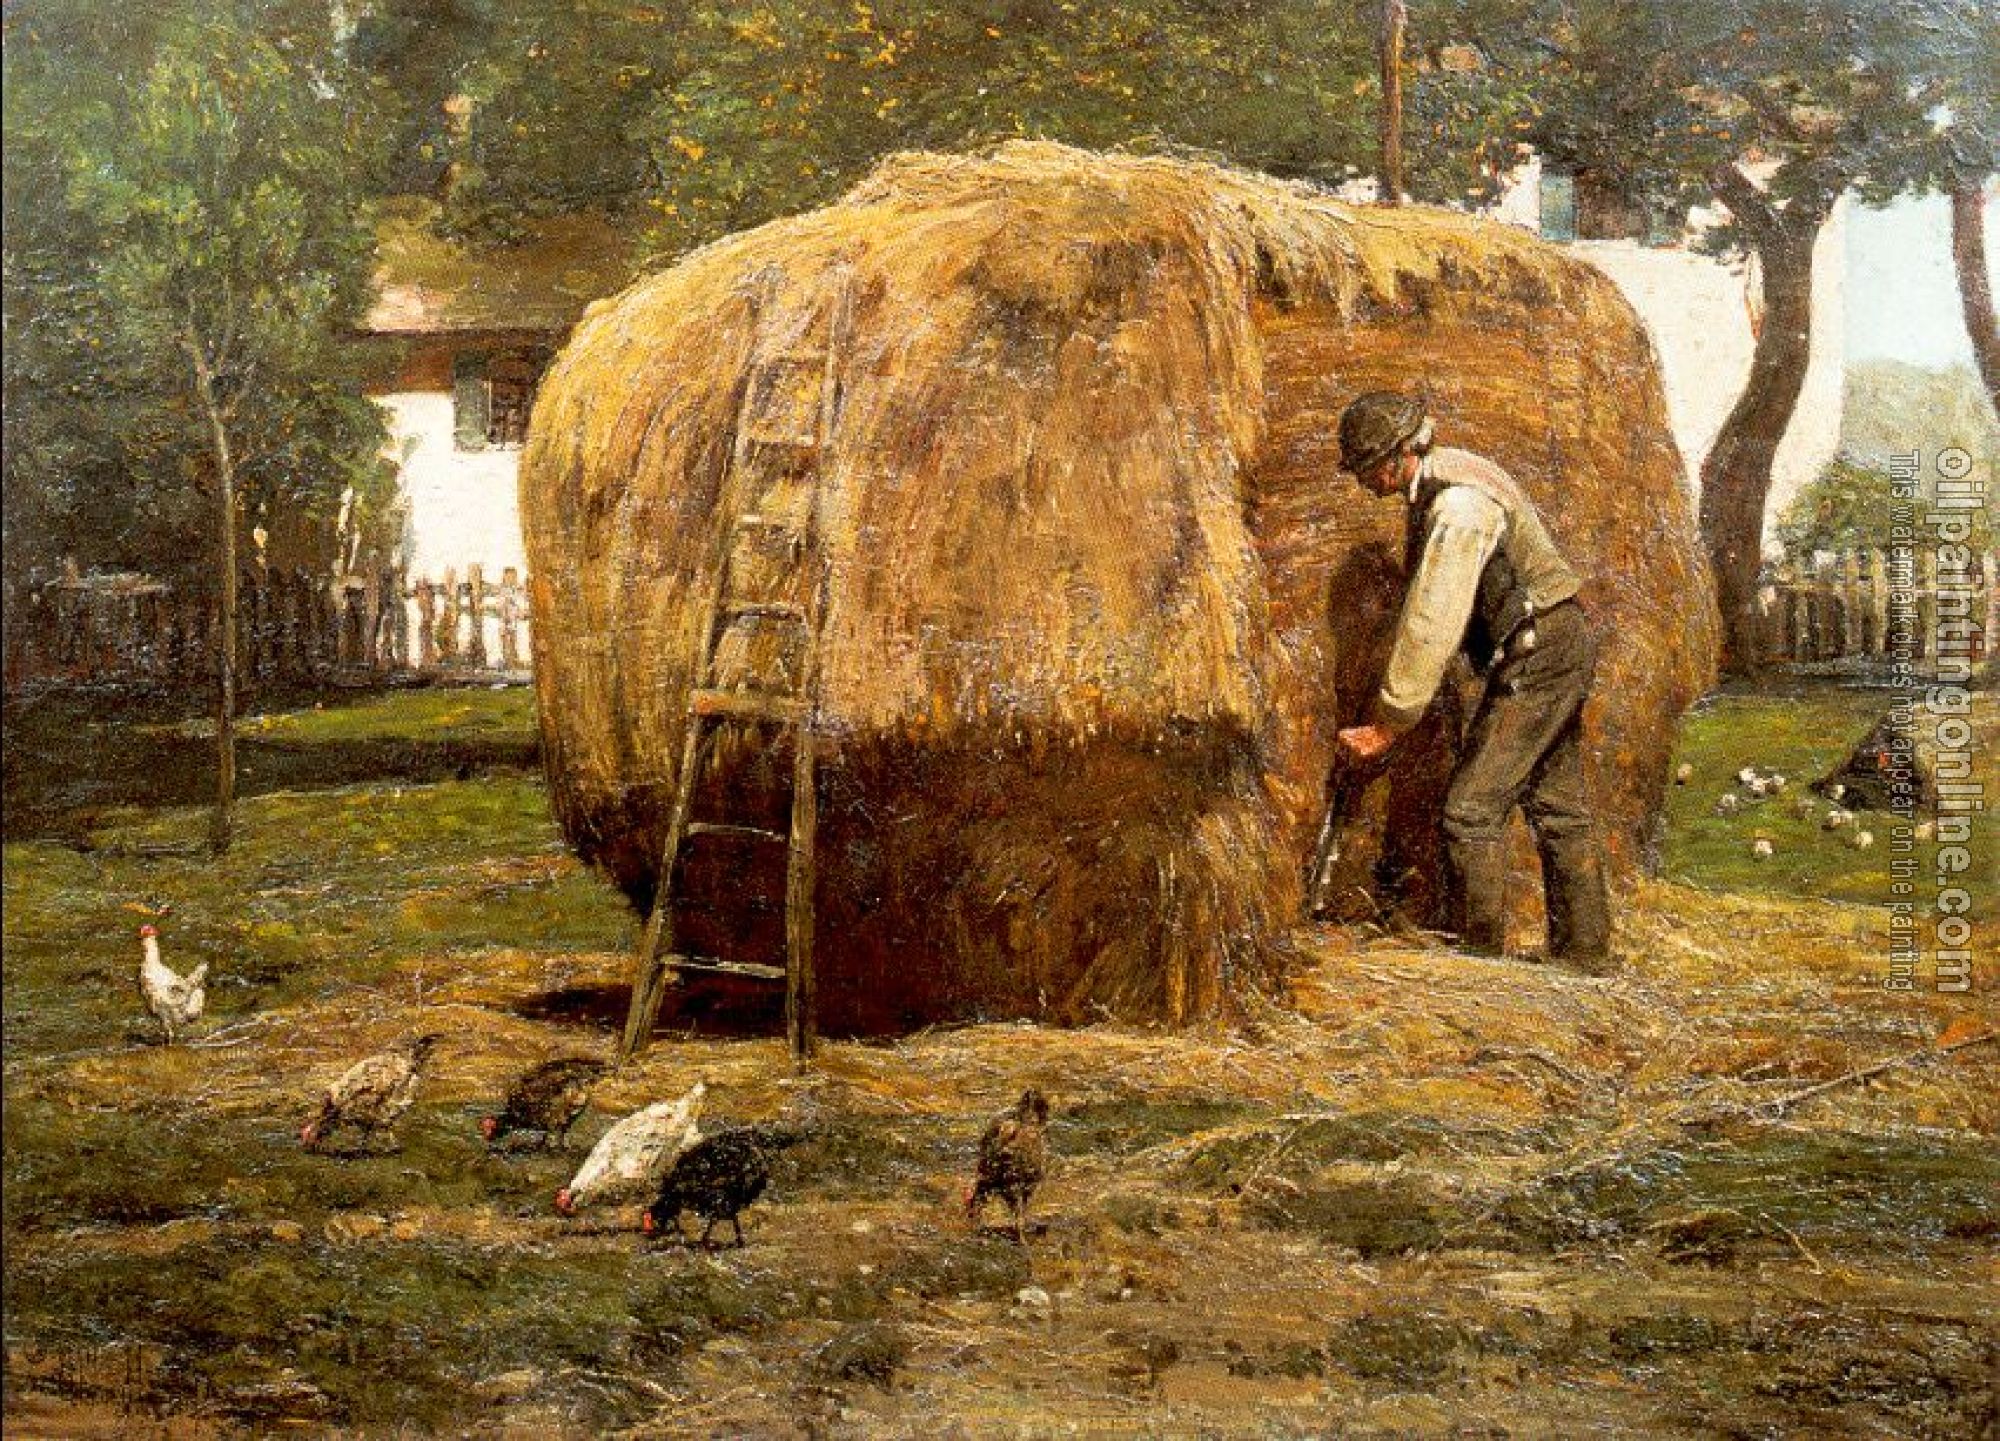 Hassam, Childe - Oil On Canvas